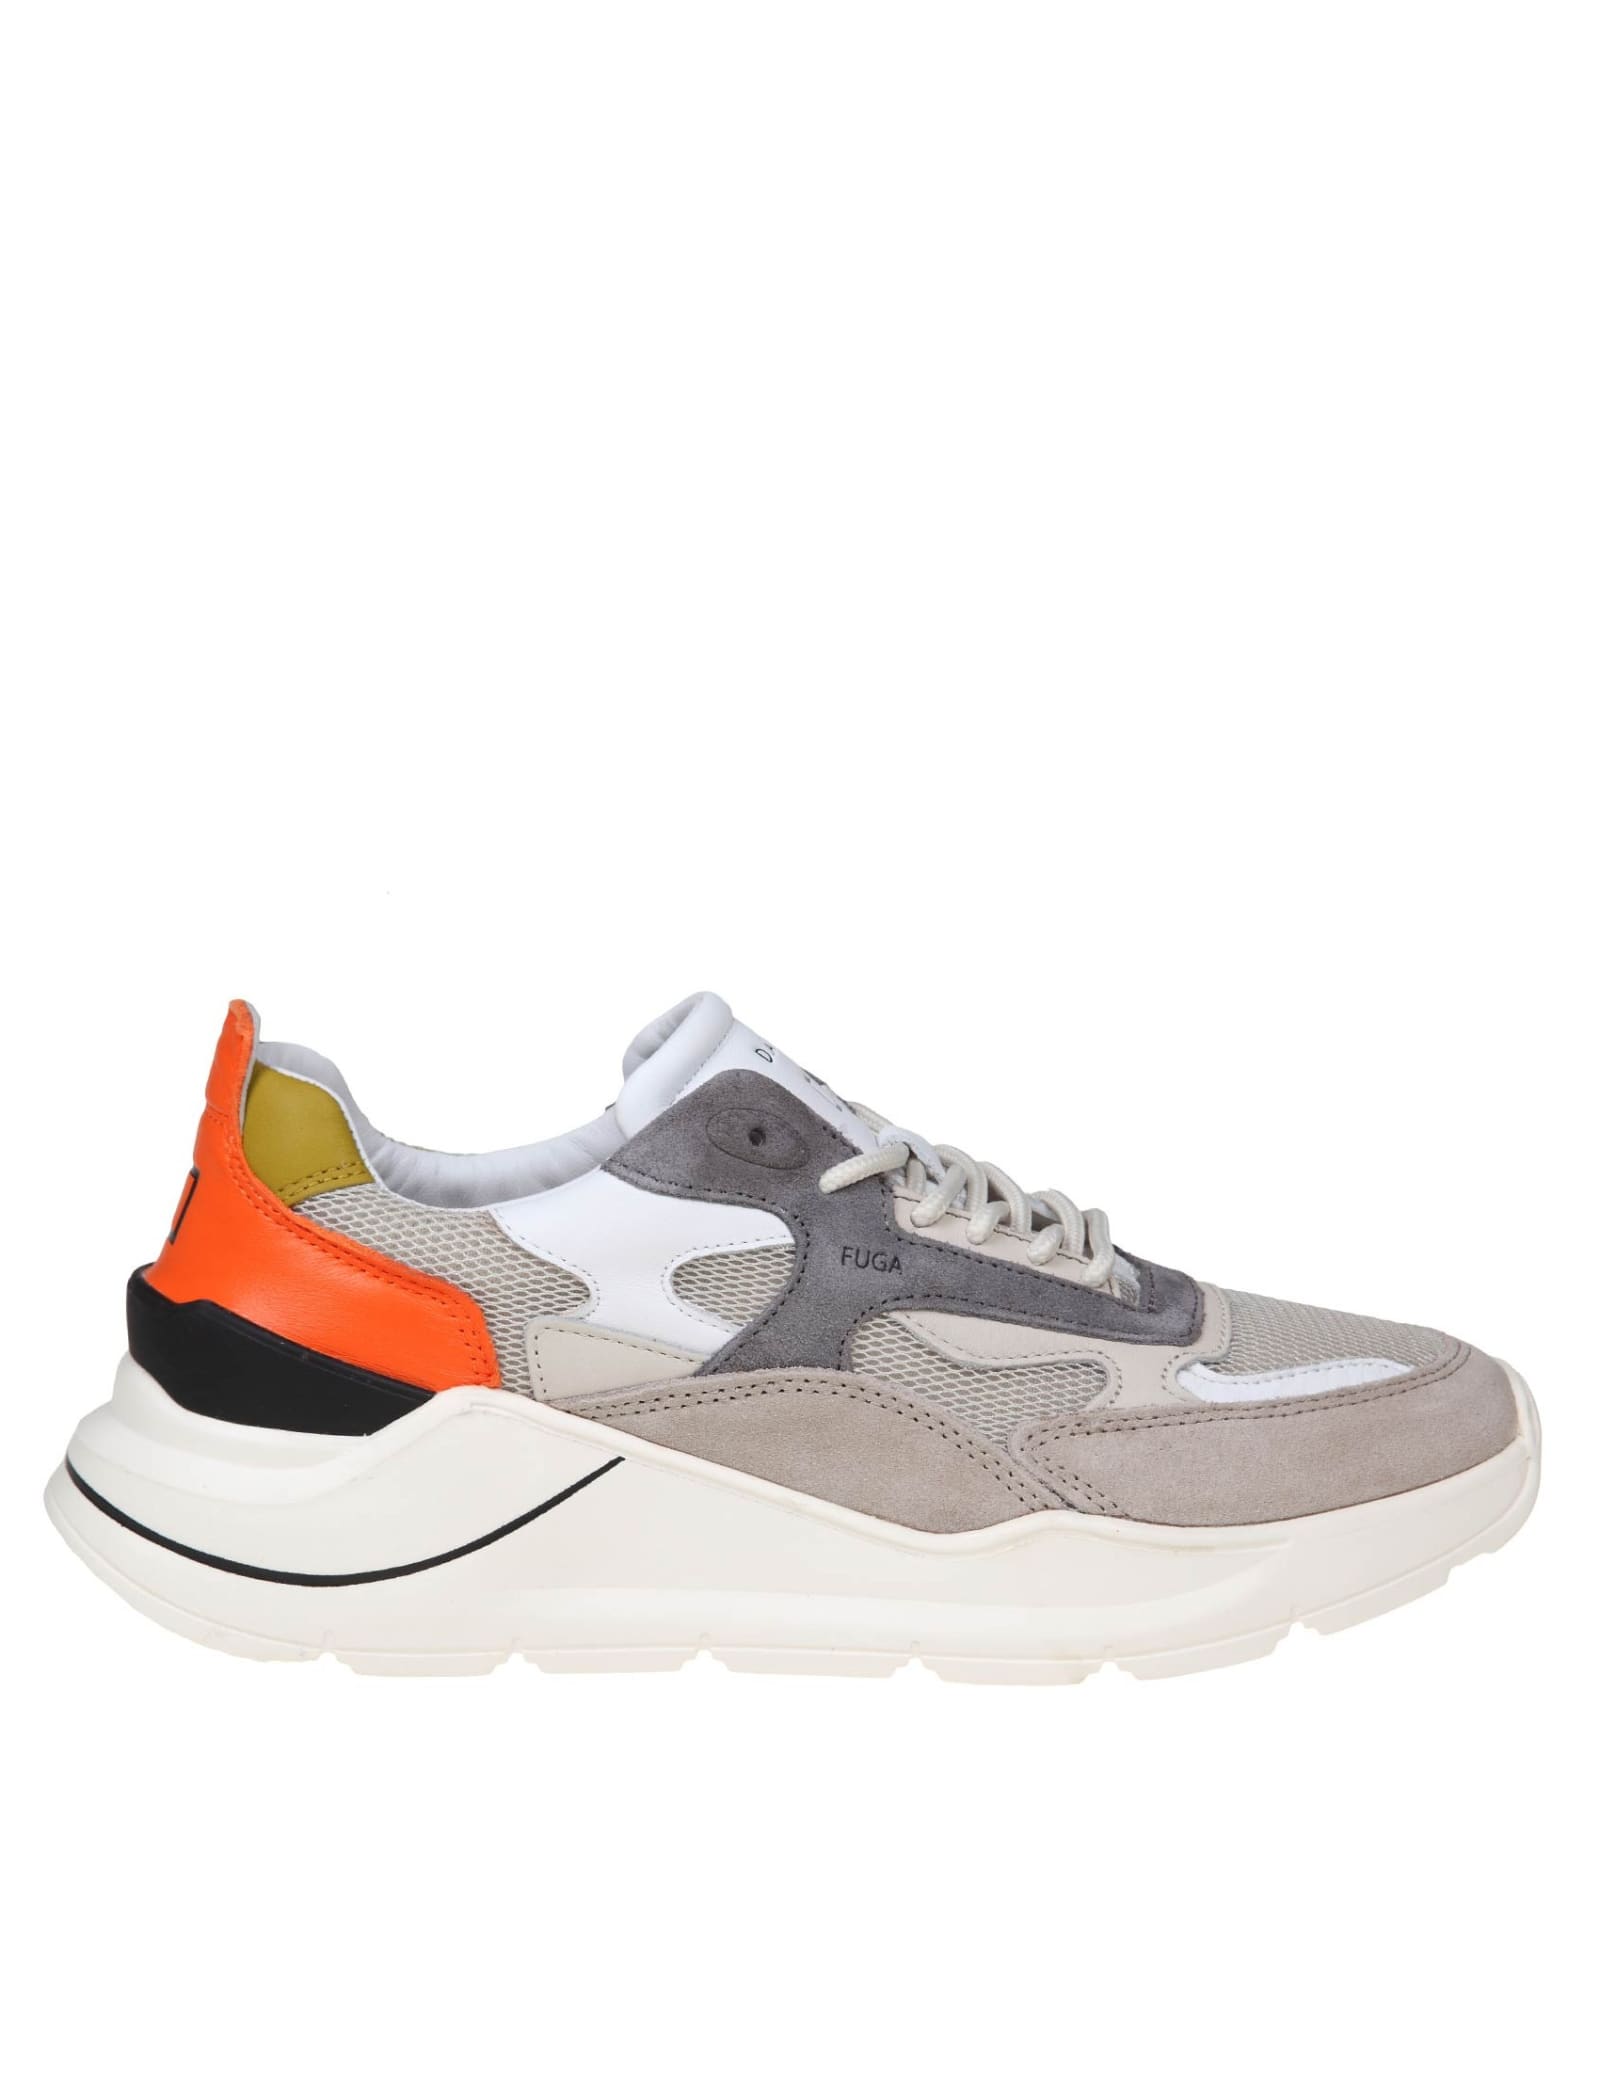 DATE FUGA SNEAKERS IN LEATHER AND IVORY/ORANGE FABRIC